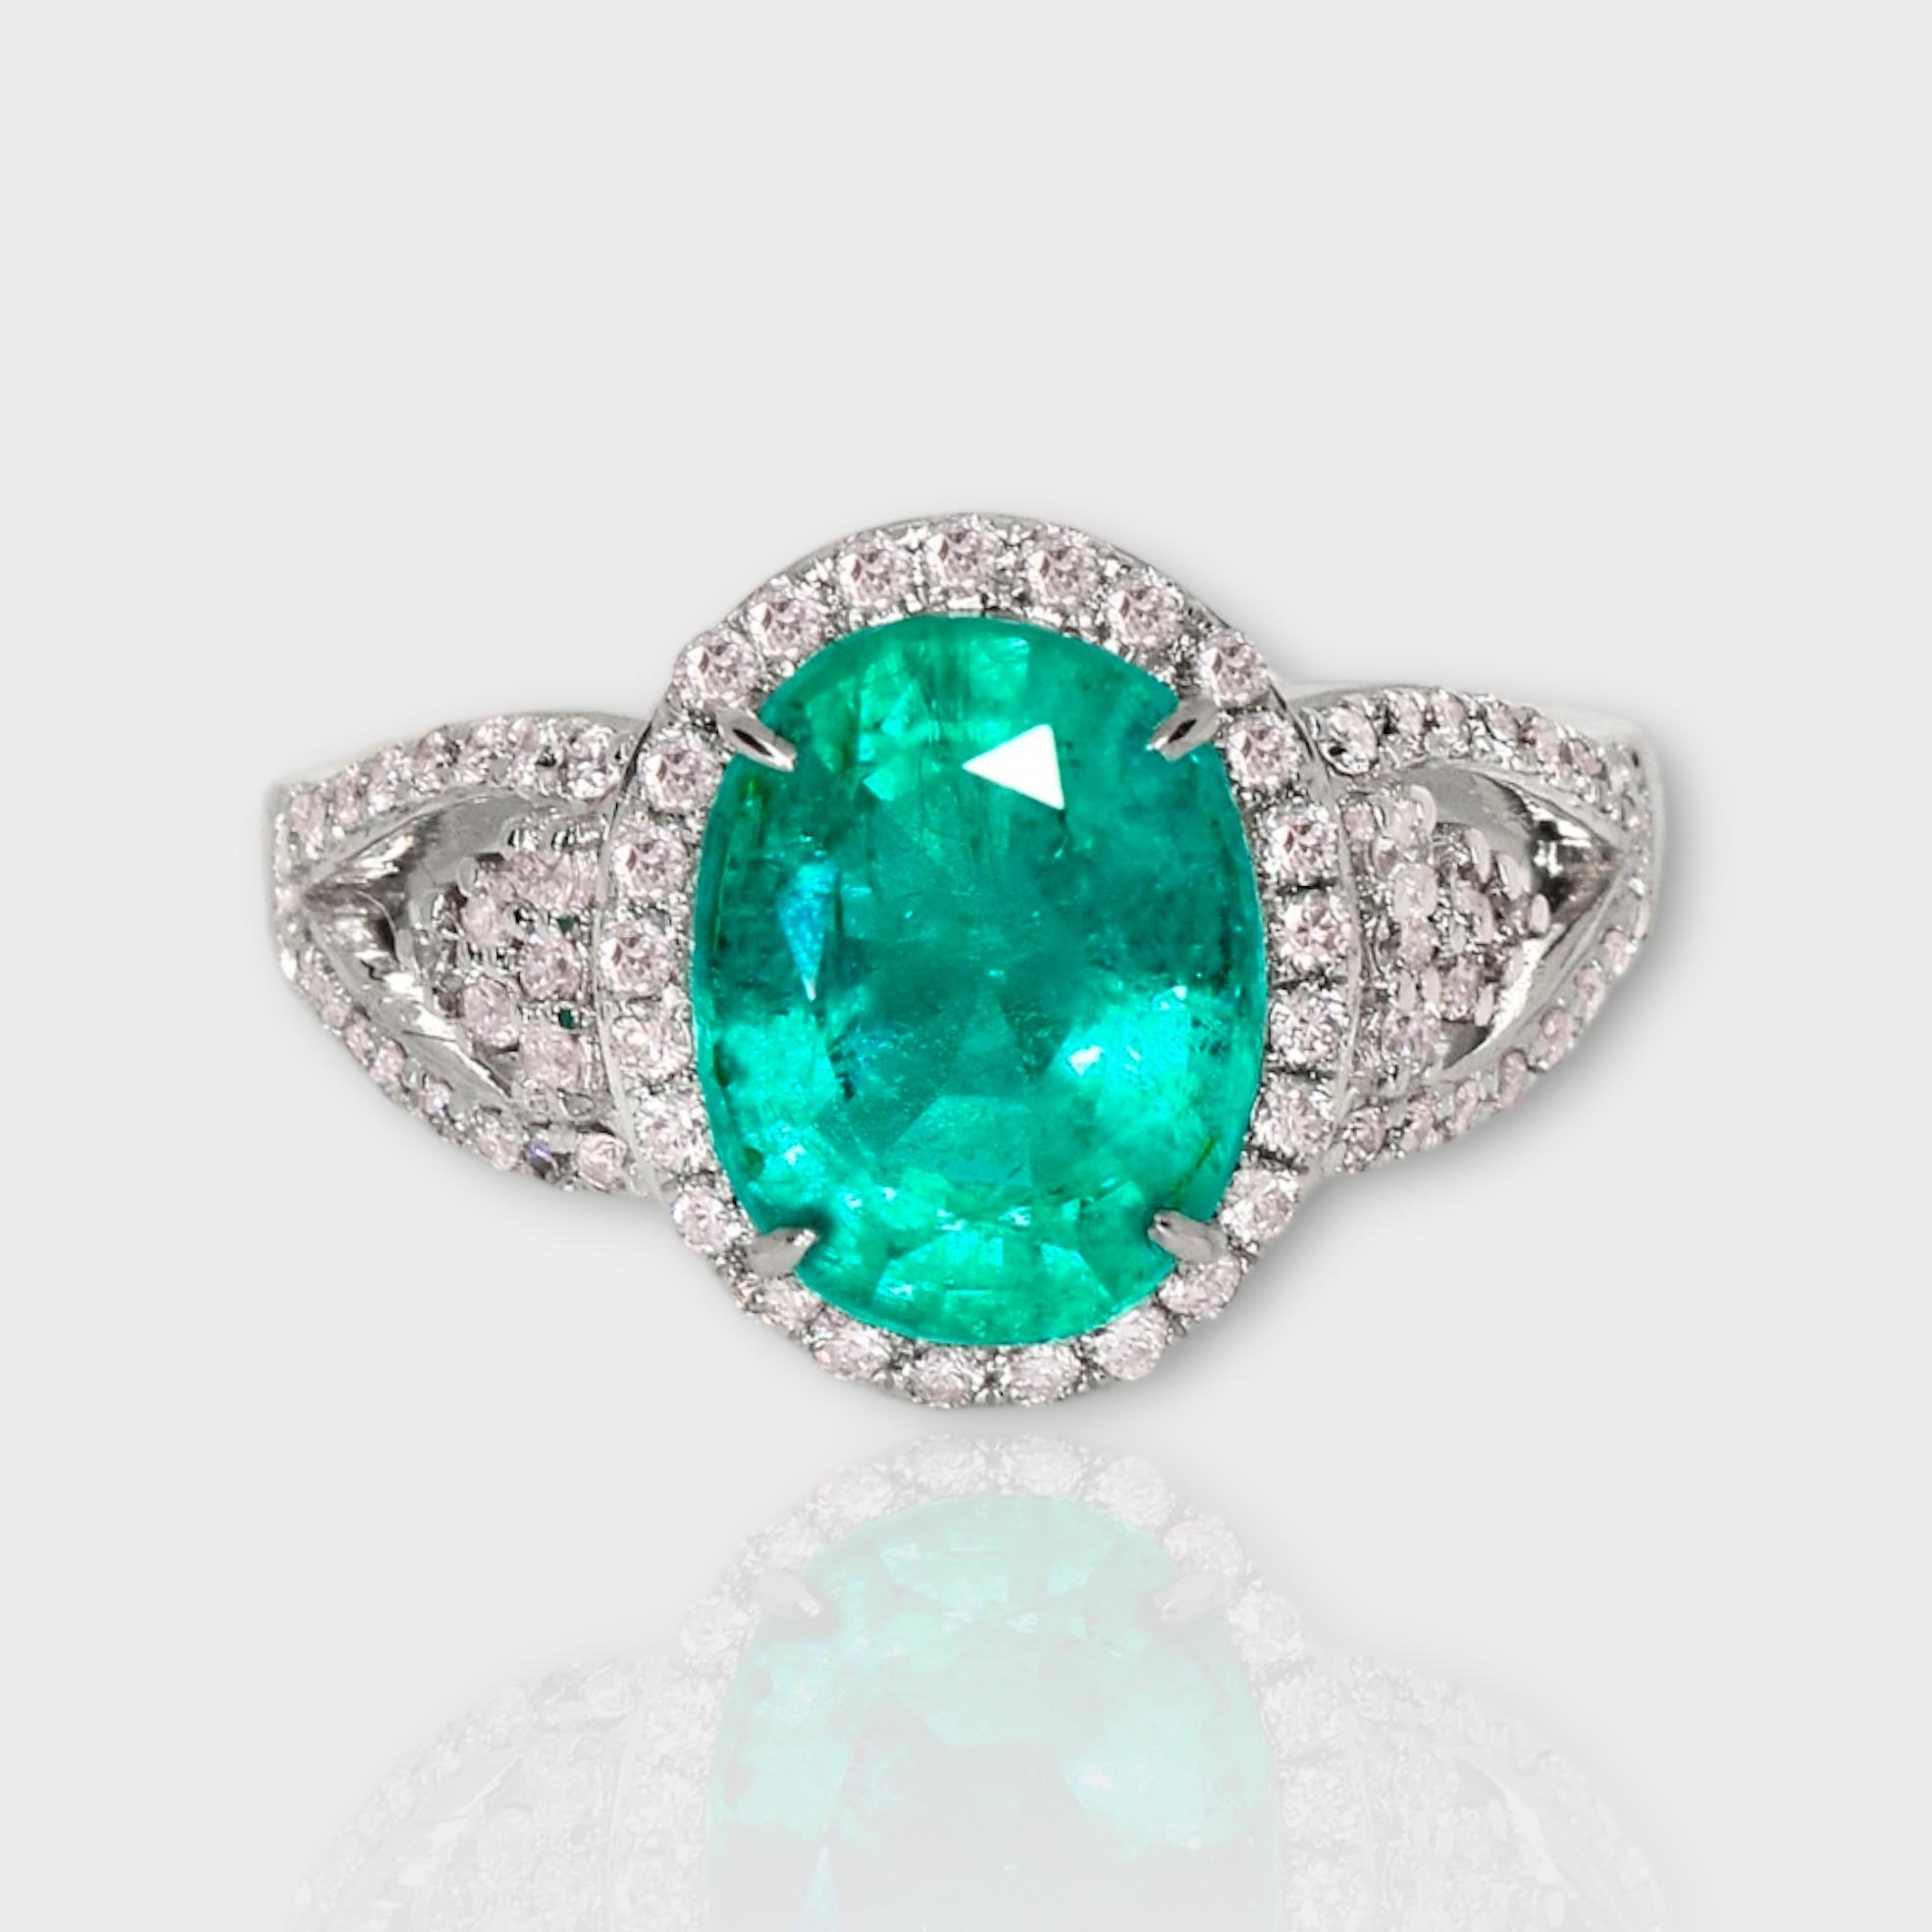 *IGI 18K White Gold 2.85 ct Emerald&Pink Diamonds Antique Art Deco Style Engagement Ring*

A natural Zambia green emerald weighing 2.85 ct is set on an 18K white gold arc deco design band with natural pink diamonds weighing 0.47 ct.

The